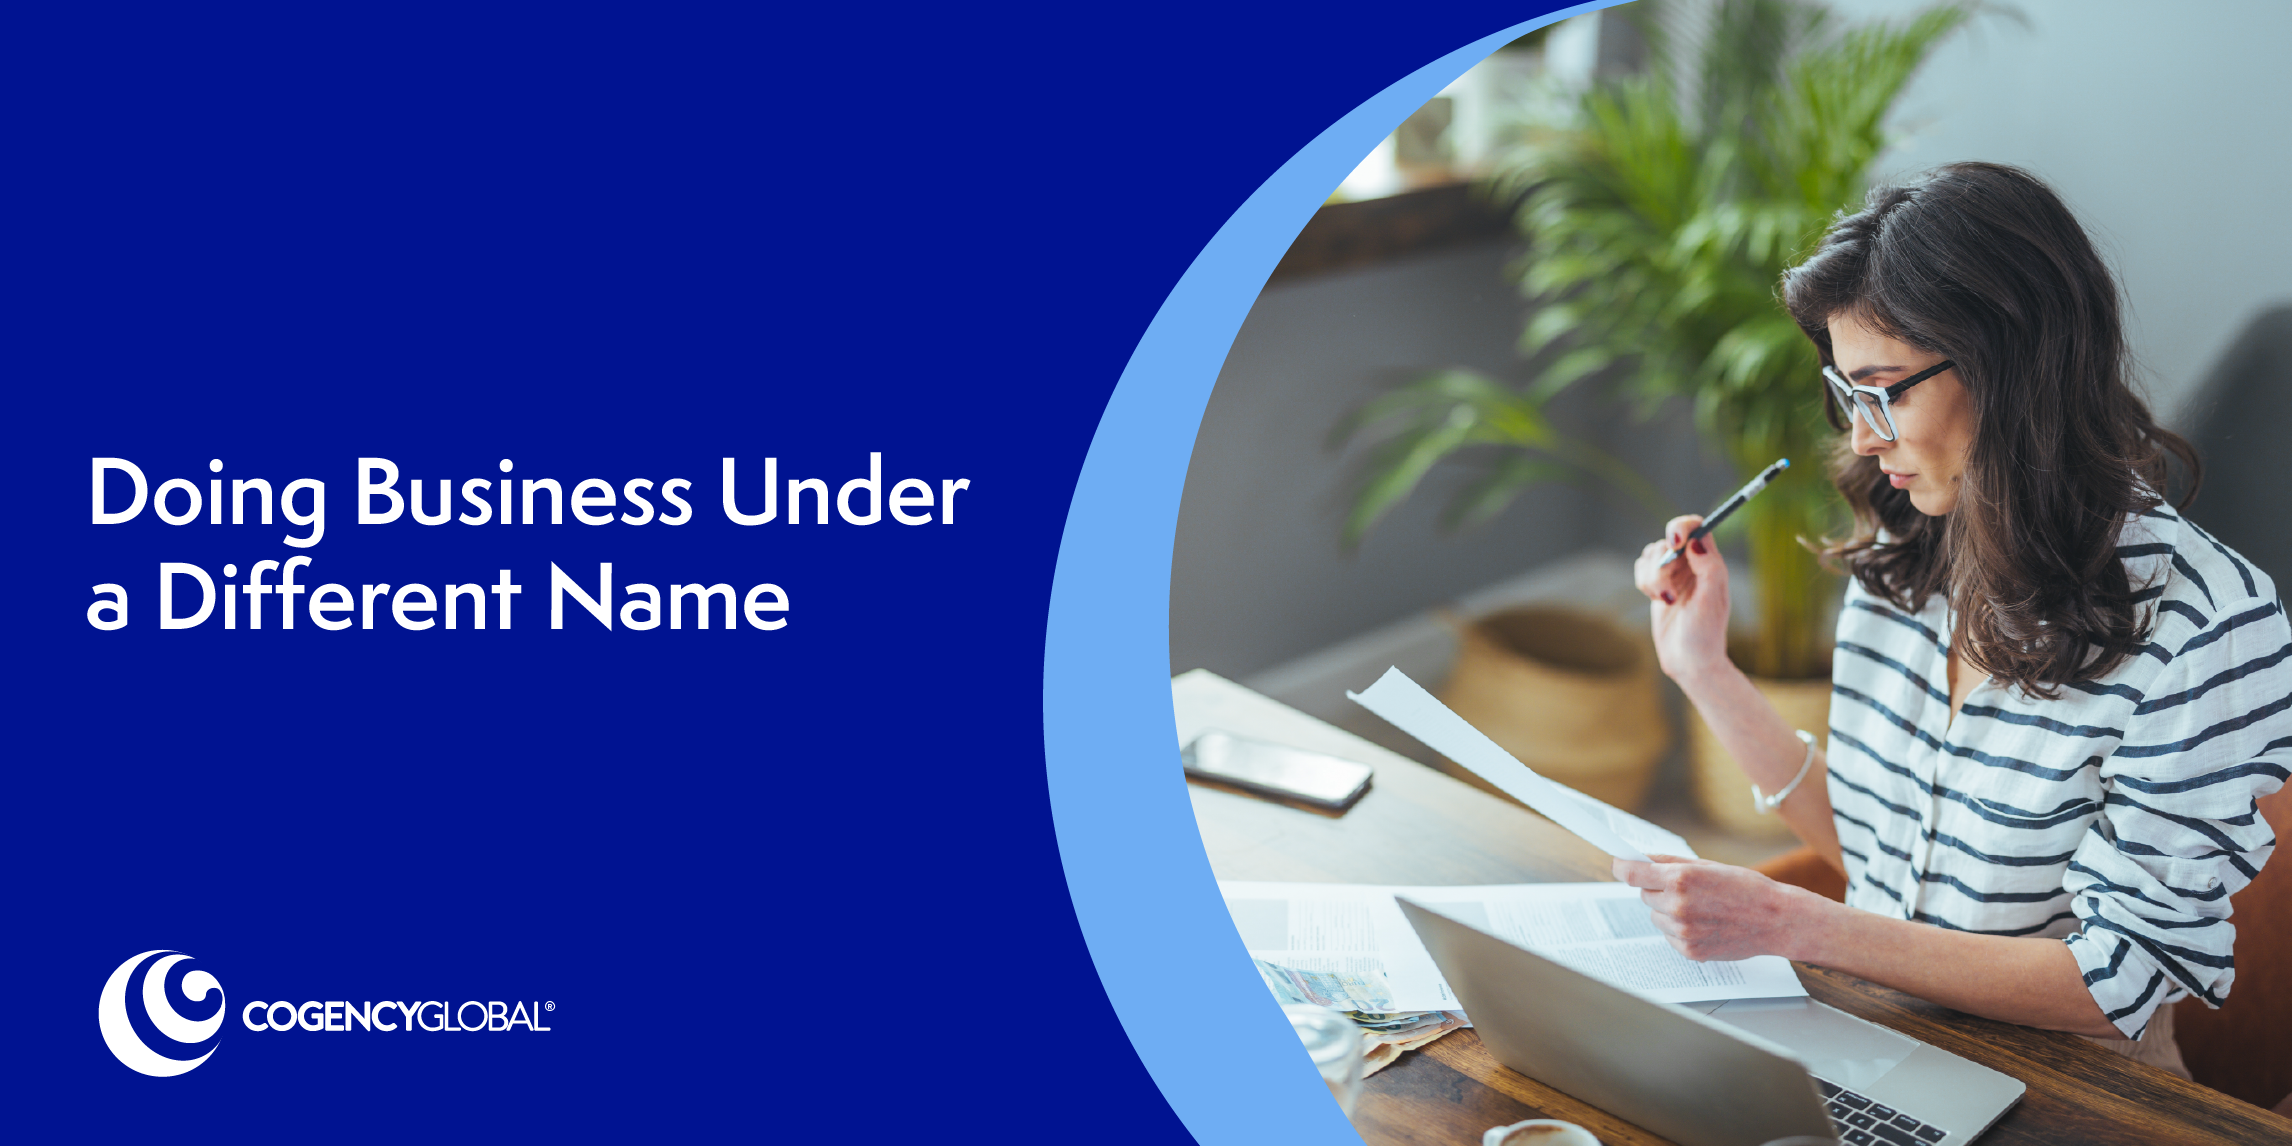 Assumed Name Registration: Doing Business Under a Fictitious or Assumed Name